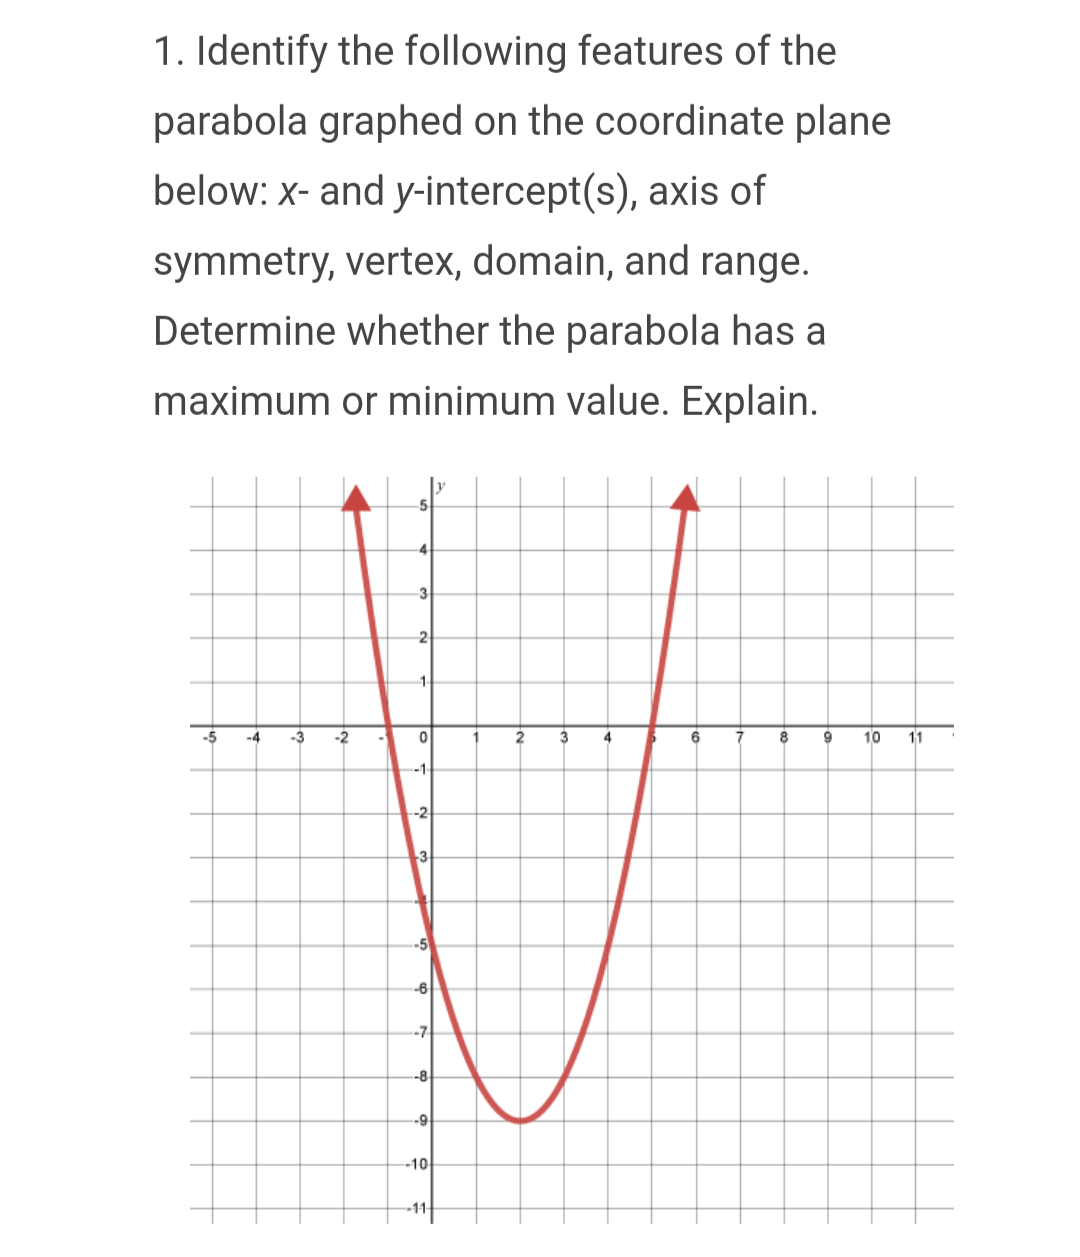 1. Identify the following features of the
parabola graphed on the coordinate plane
below: x- and y-intercept(s), axis of
symmetry, vertex, domain, and range.
Determine whether the parabola has a
maximum or minimum value. Explain.
3
2
1
-5 -4 -3
-2
-
0
1
2
3
4
Б 6
7
8
9
10
11
-1-
-2
3
-5
-6
-7
-8
-9
-10-
-11-